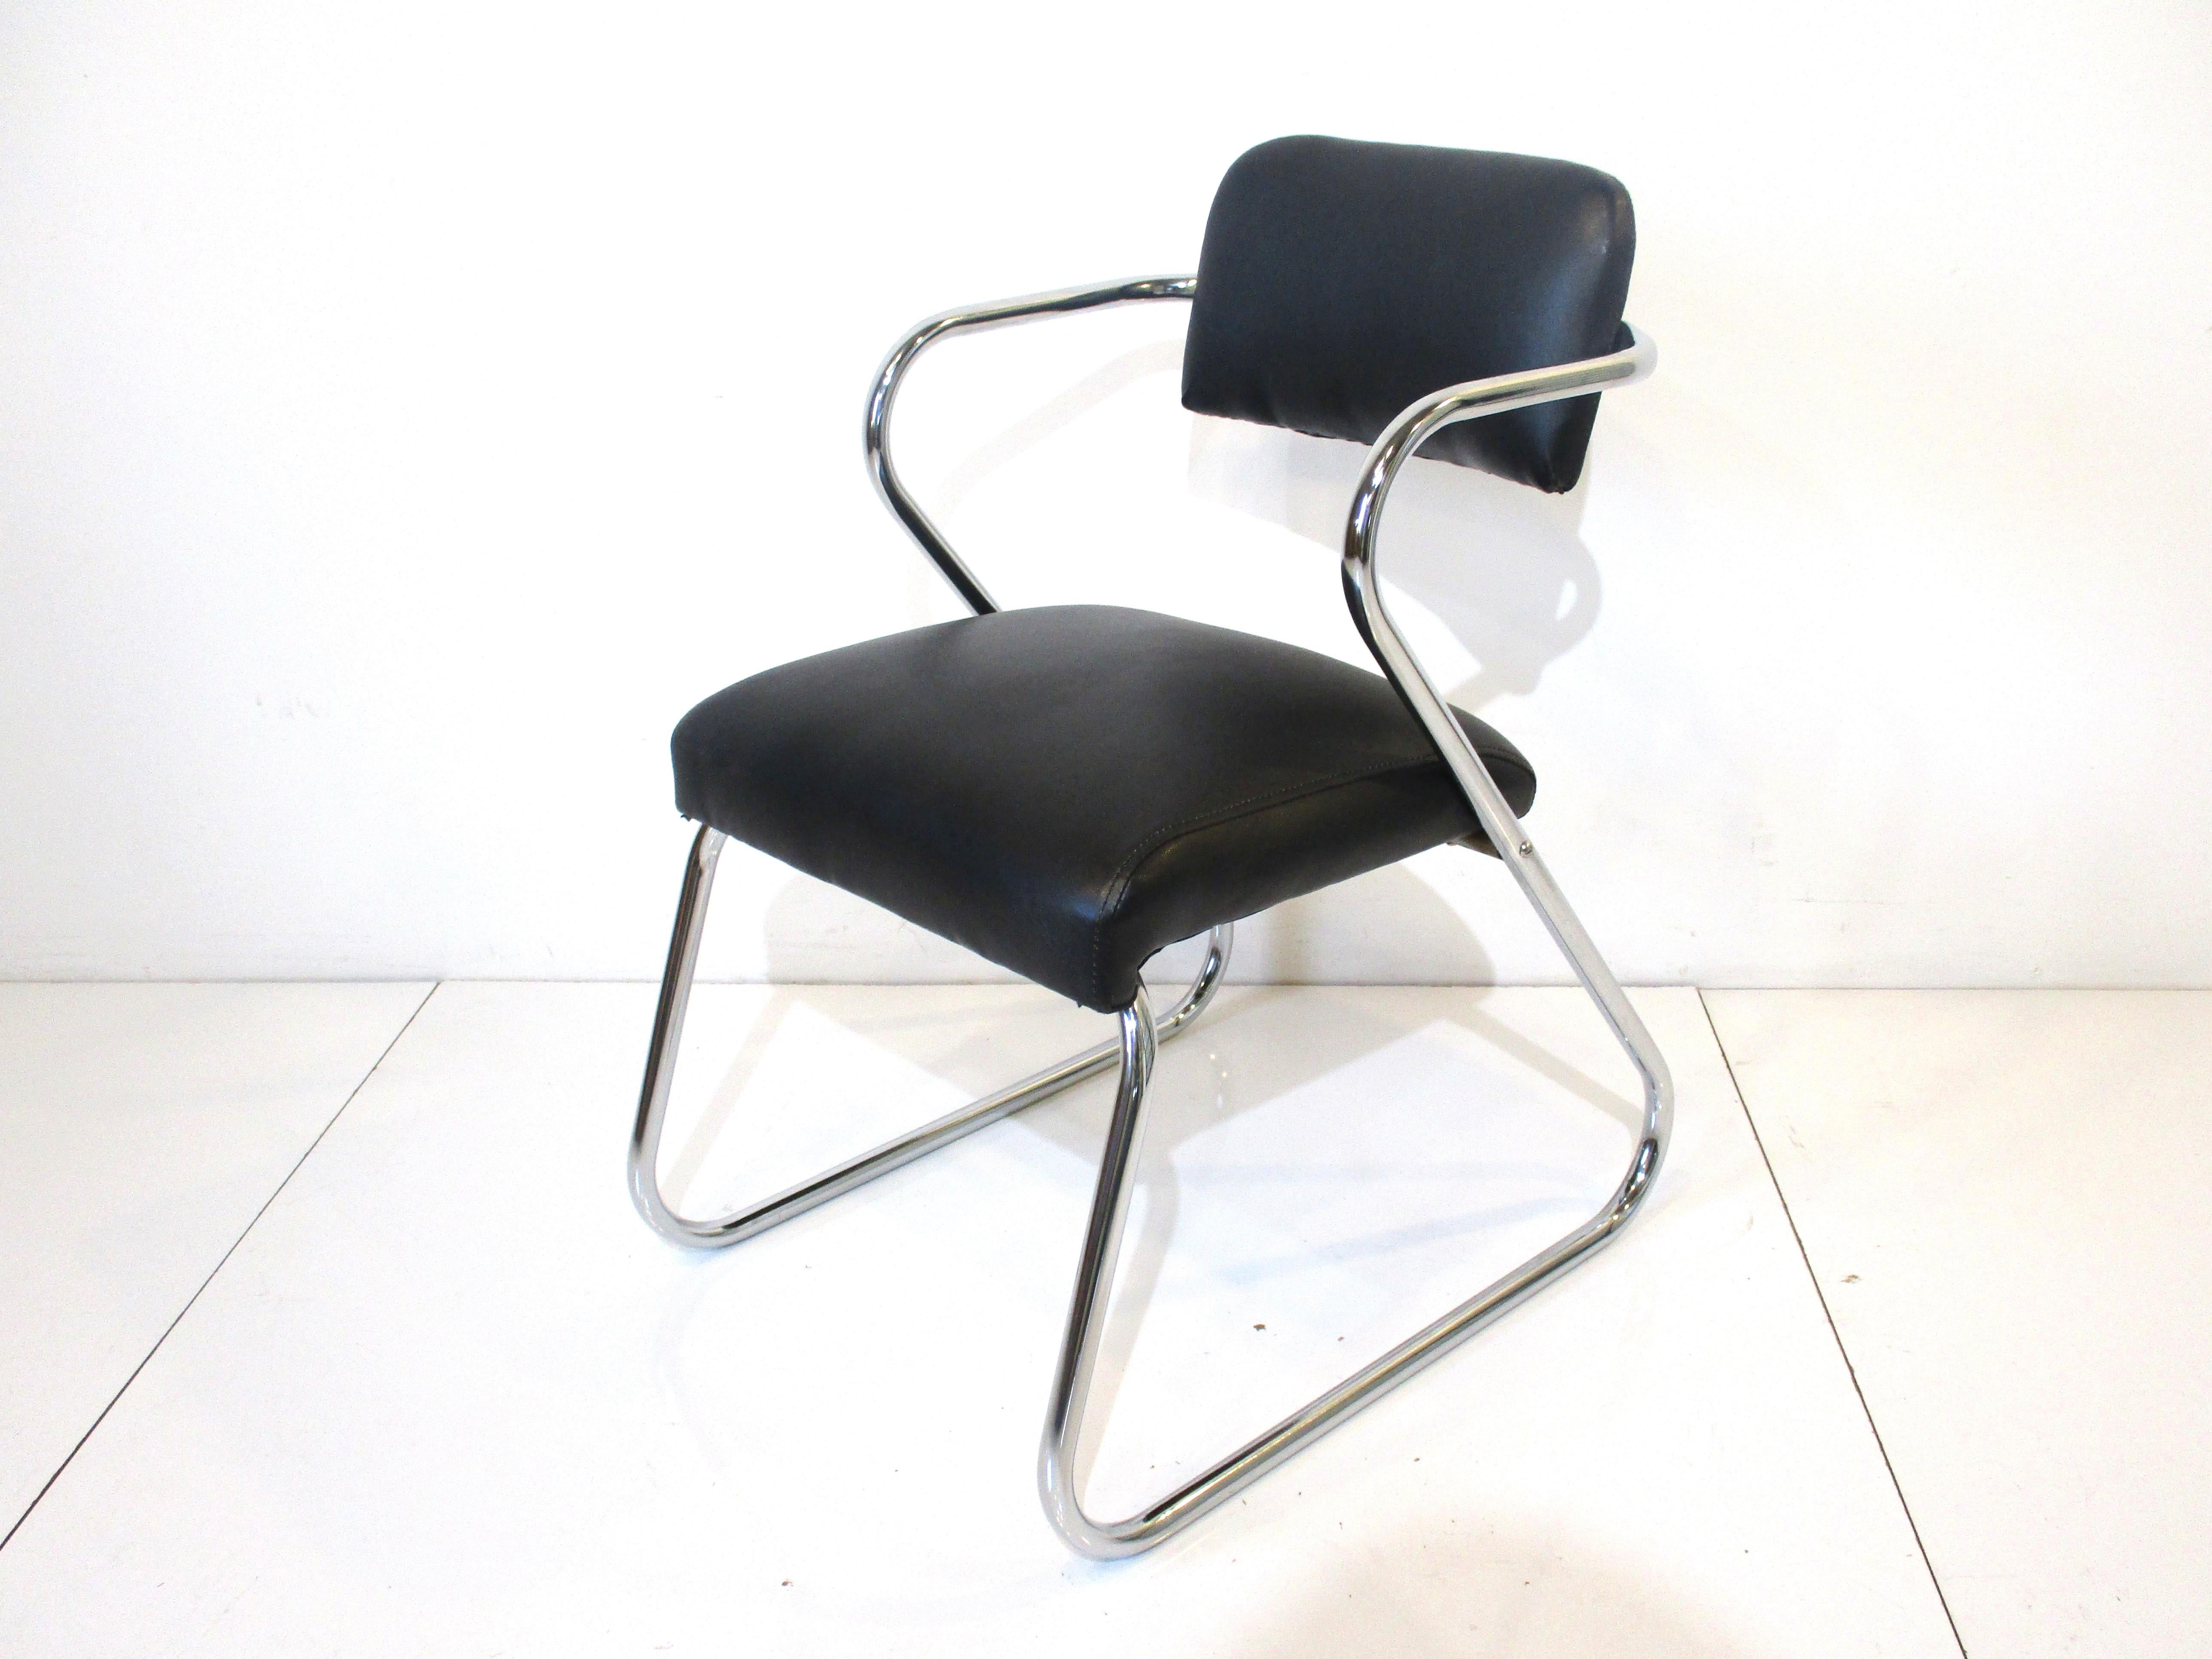 A set of four sculptural chromed framed dining chairs in the design manner of Gilbert Rohde's Z chairs . Upholstered in a satin black soft and smooth leatherette fabric which makes them very comfortable for long periods of sitting . Manufactured by